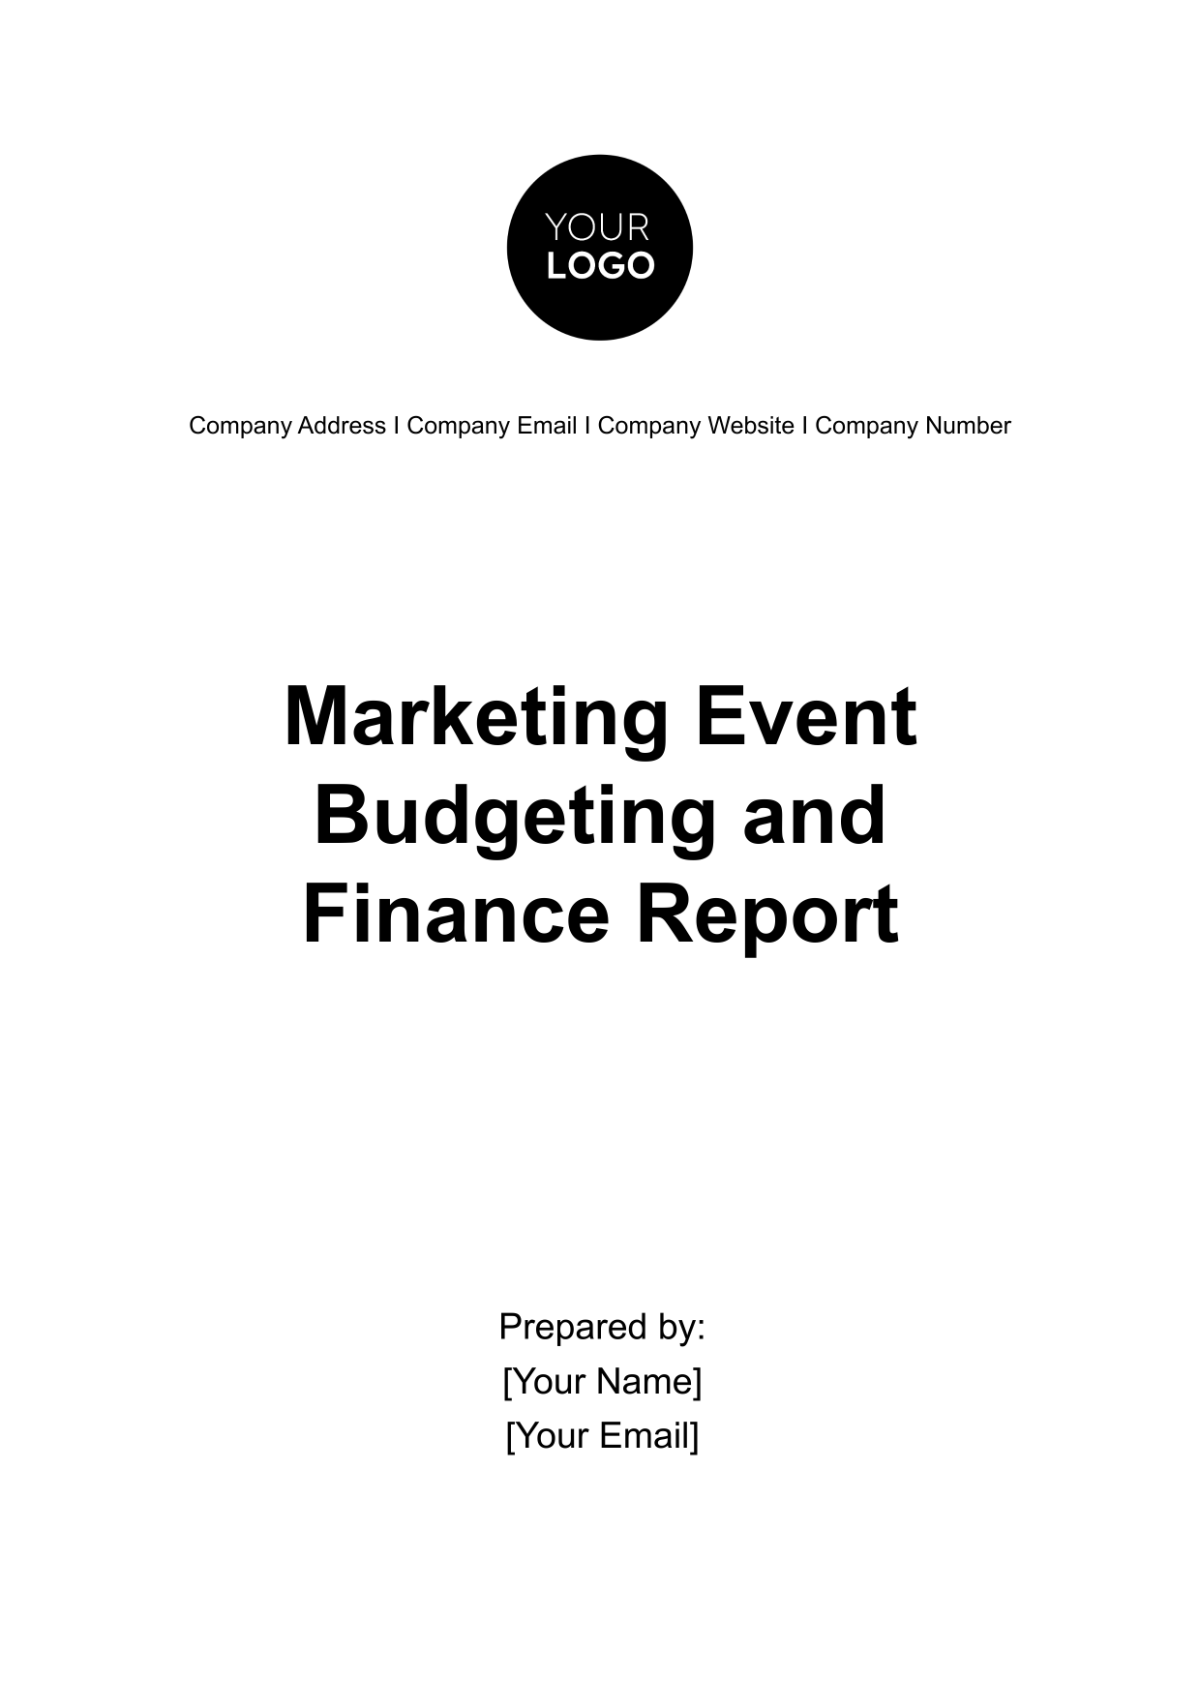 Free Marketing Event Budgeting and Finance Report Template